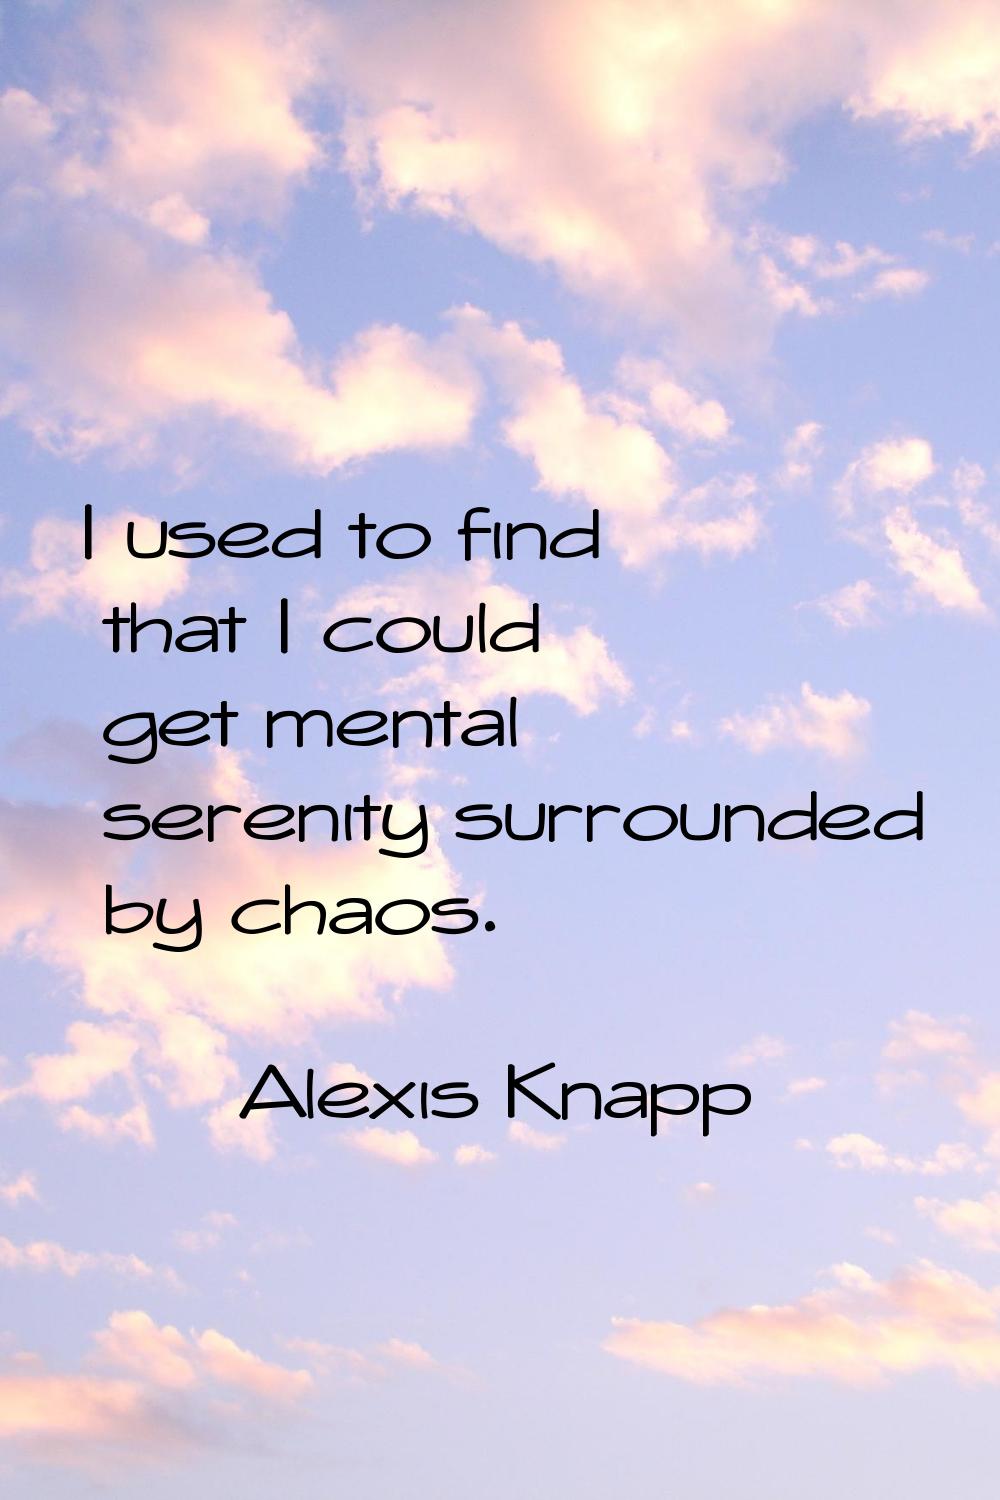 I used to find that I could get mental serenity surrounded by chaos.